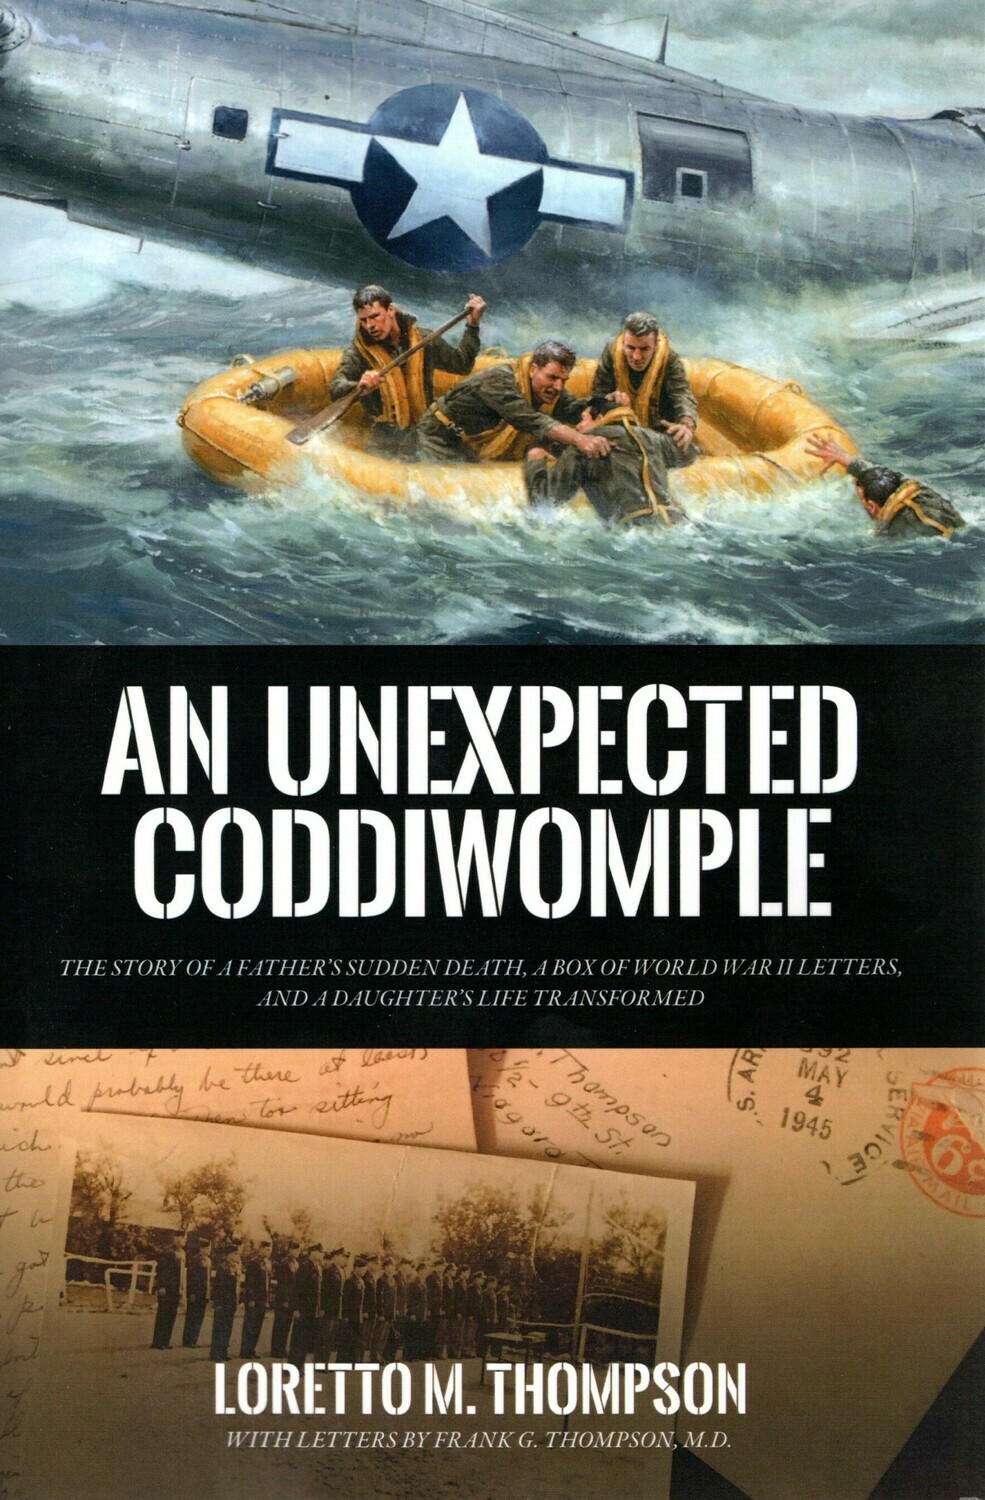 An Unexpected Coddiwomple - Hardcover